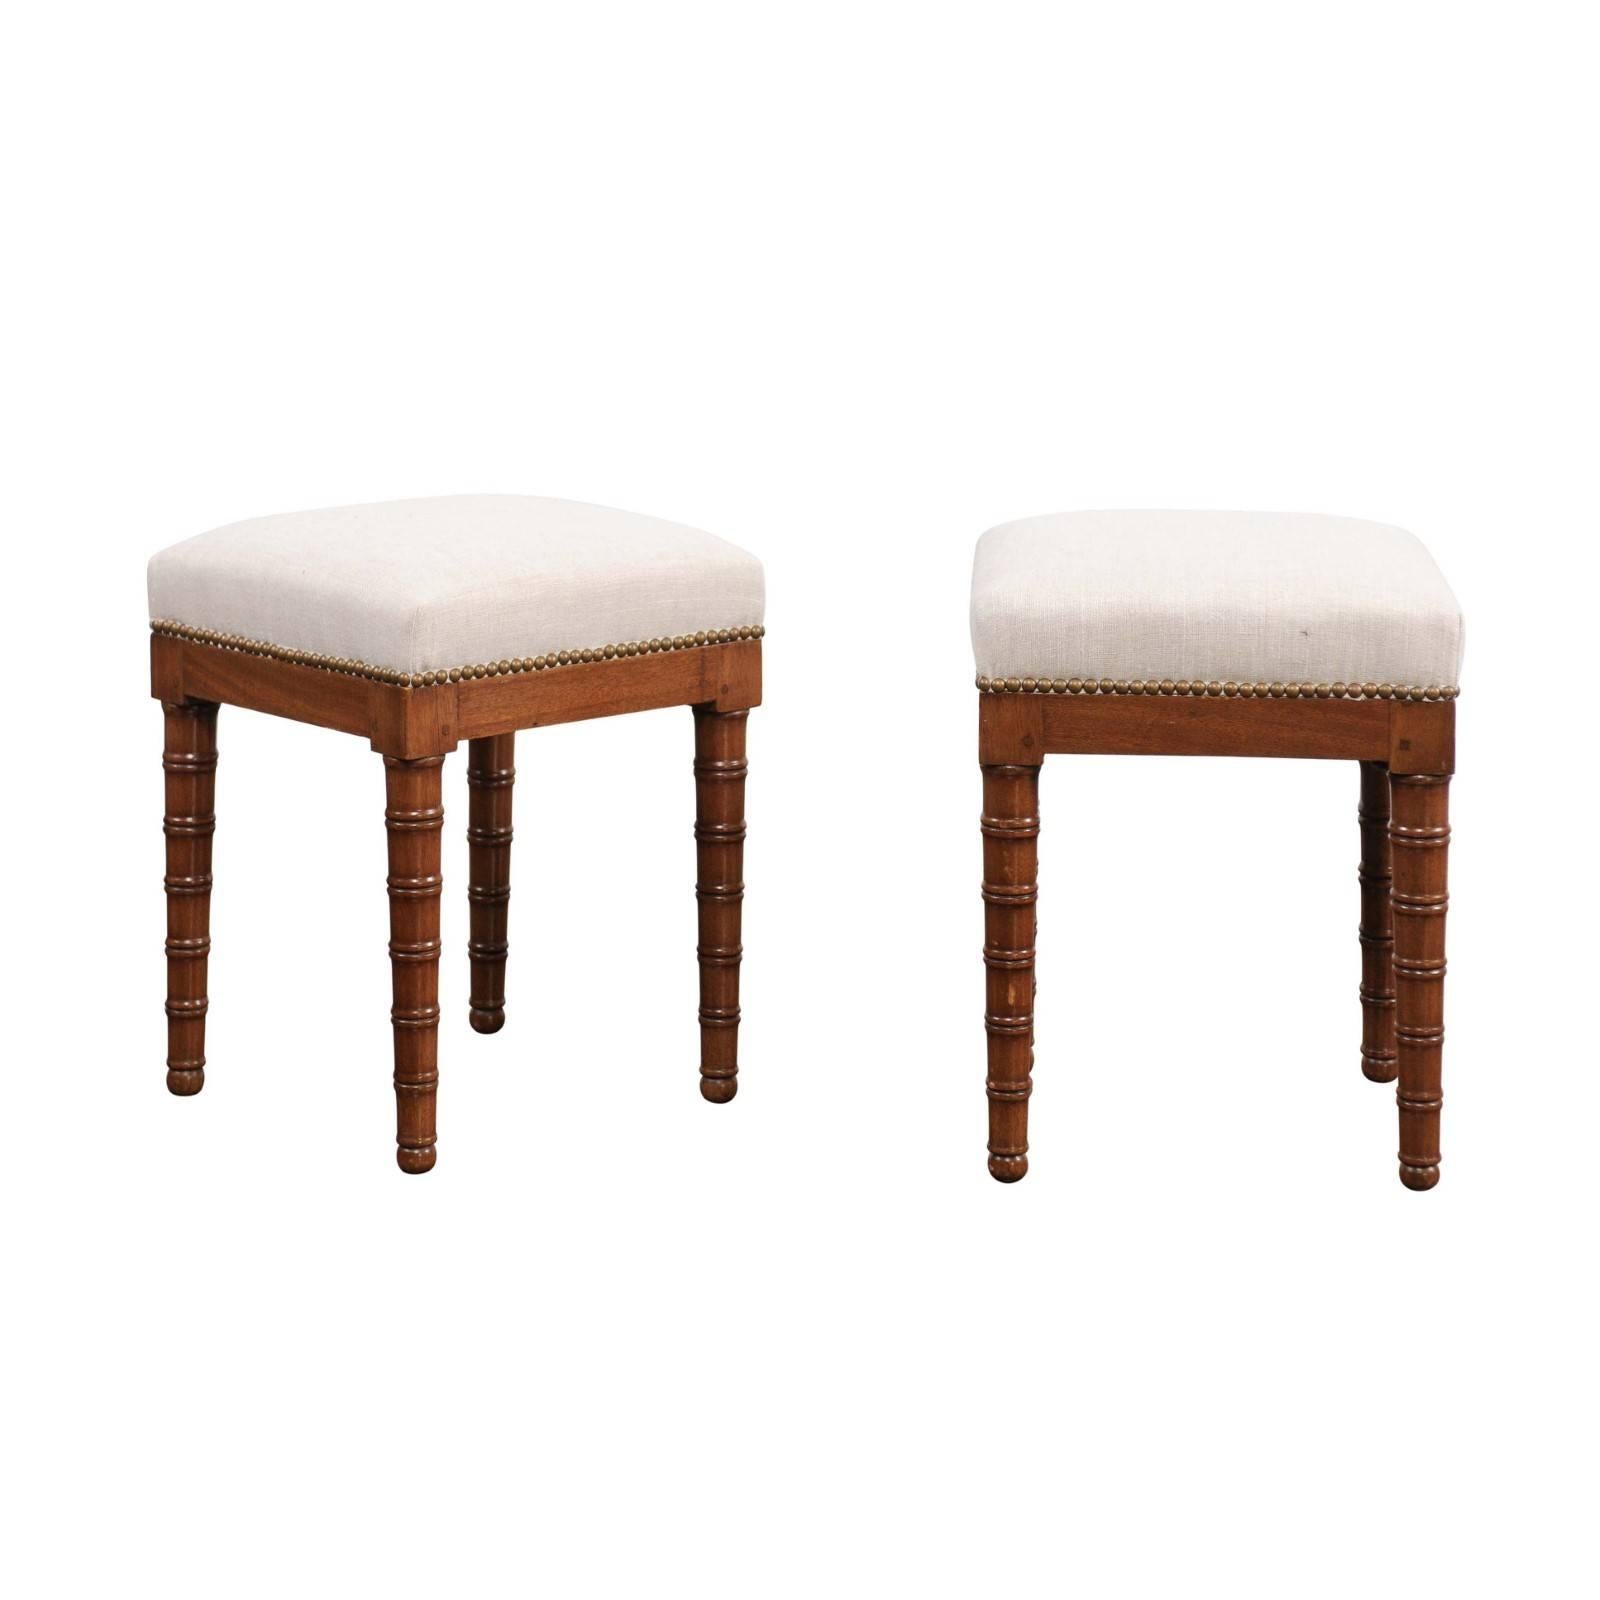 Pair of English 1870s Mahogany Stools with Faux-Bamboo Legs and Upholstery